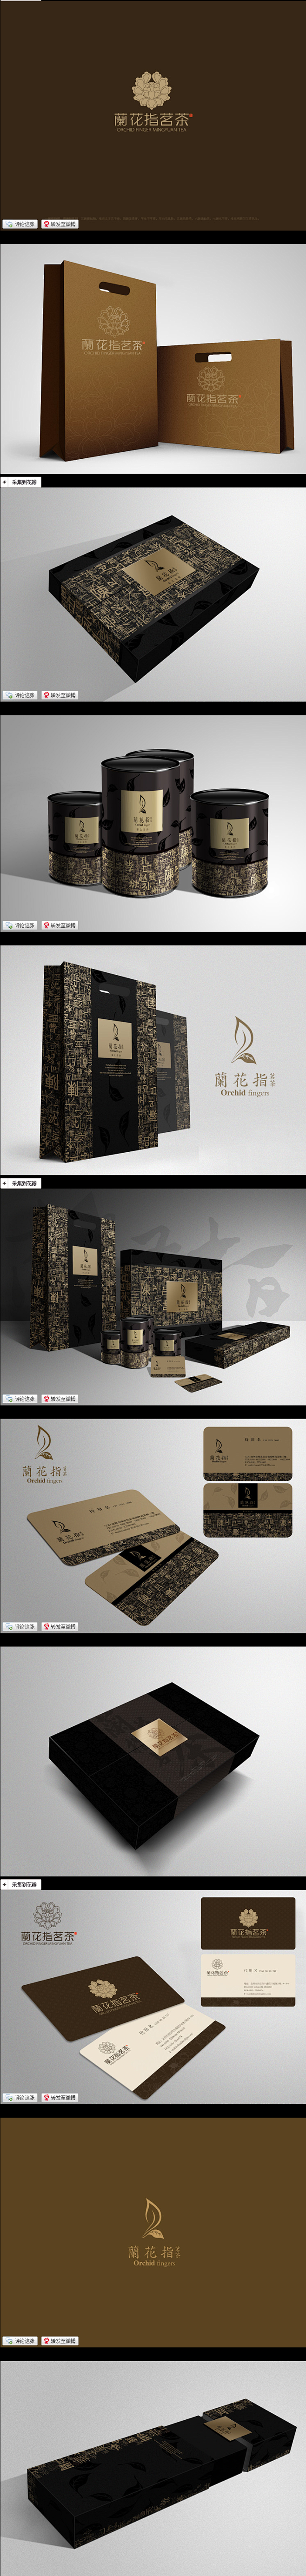 TEA LOGO and PACK - ...